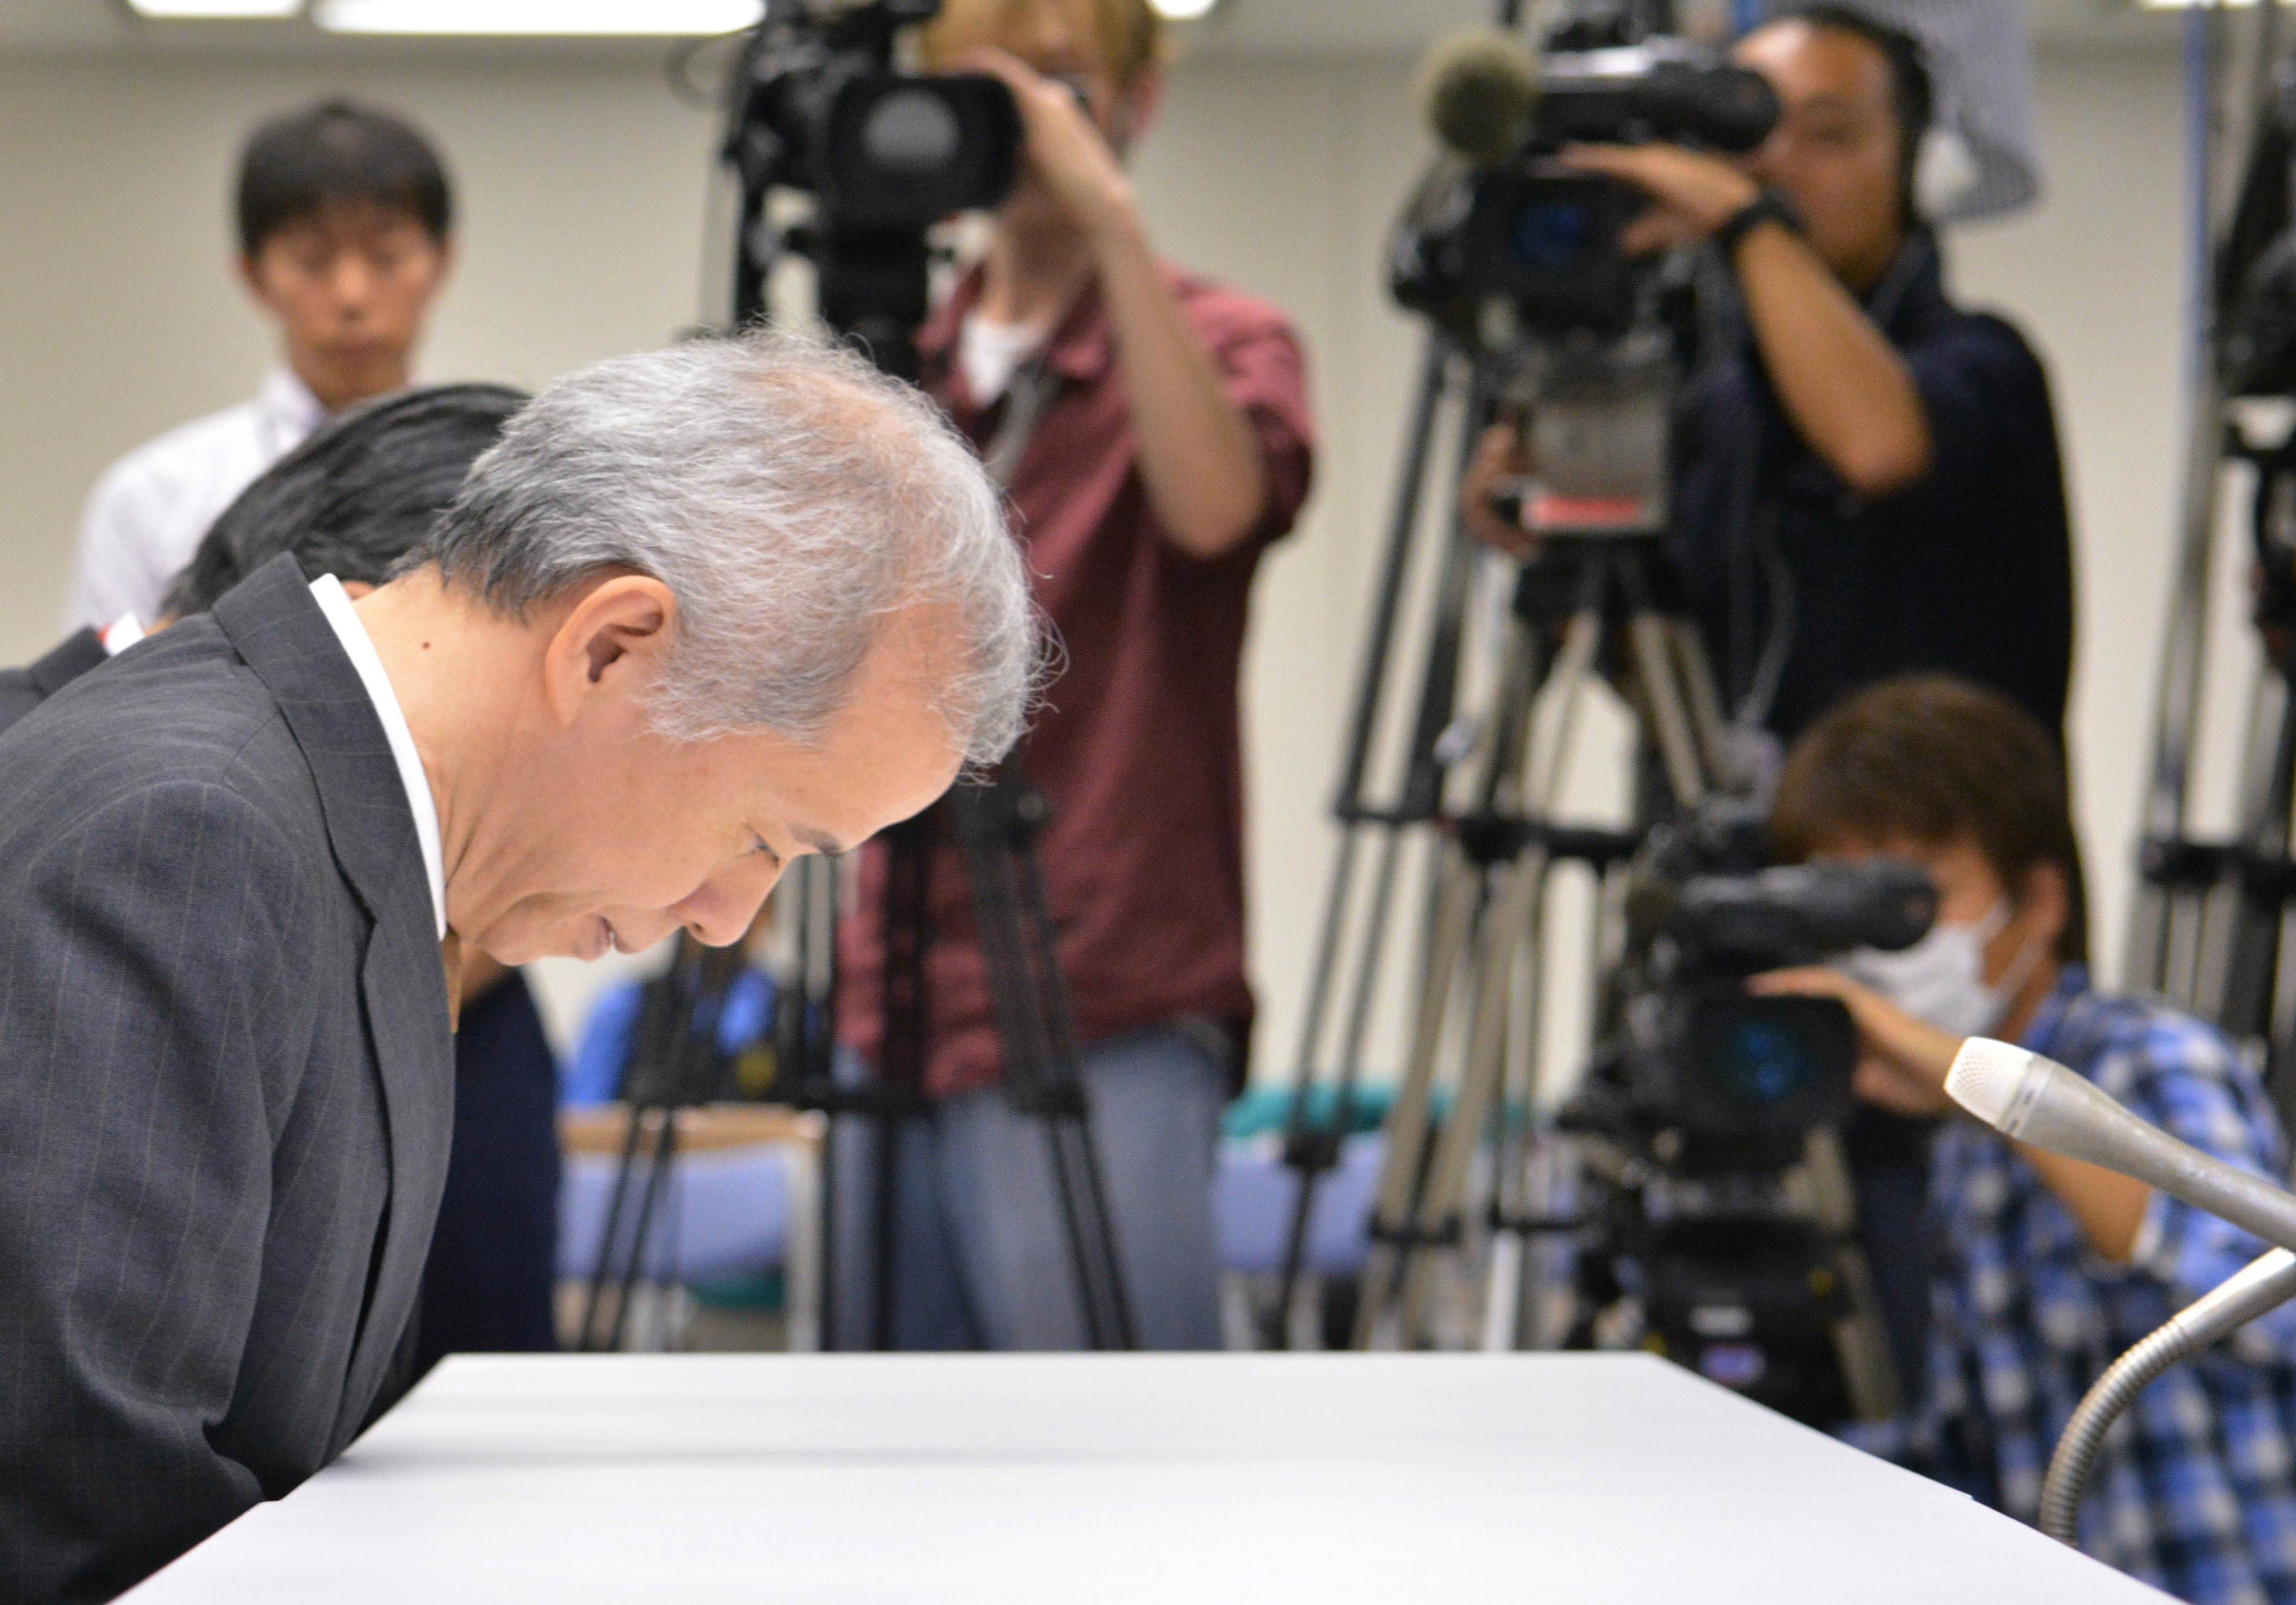 On the carpet: Tokyo Electric Power Co. President Naomi Hirose bows during a meeting with Nuclear Regulation Authority Secretary-General Katsuhiko Ikeda in Tokyo on Friday. | AFP-JIJI